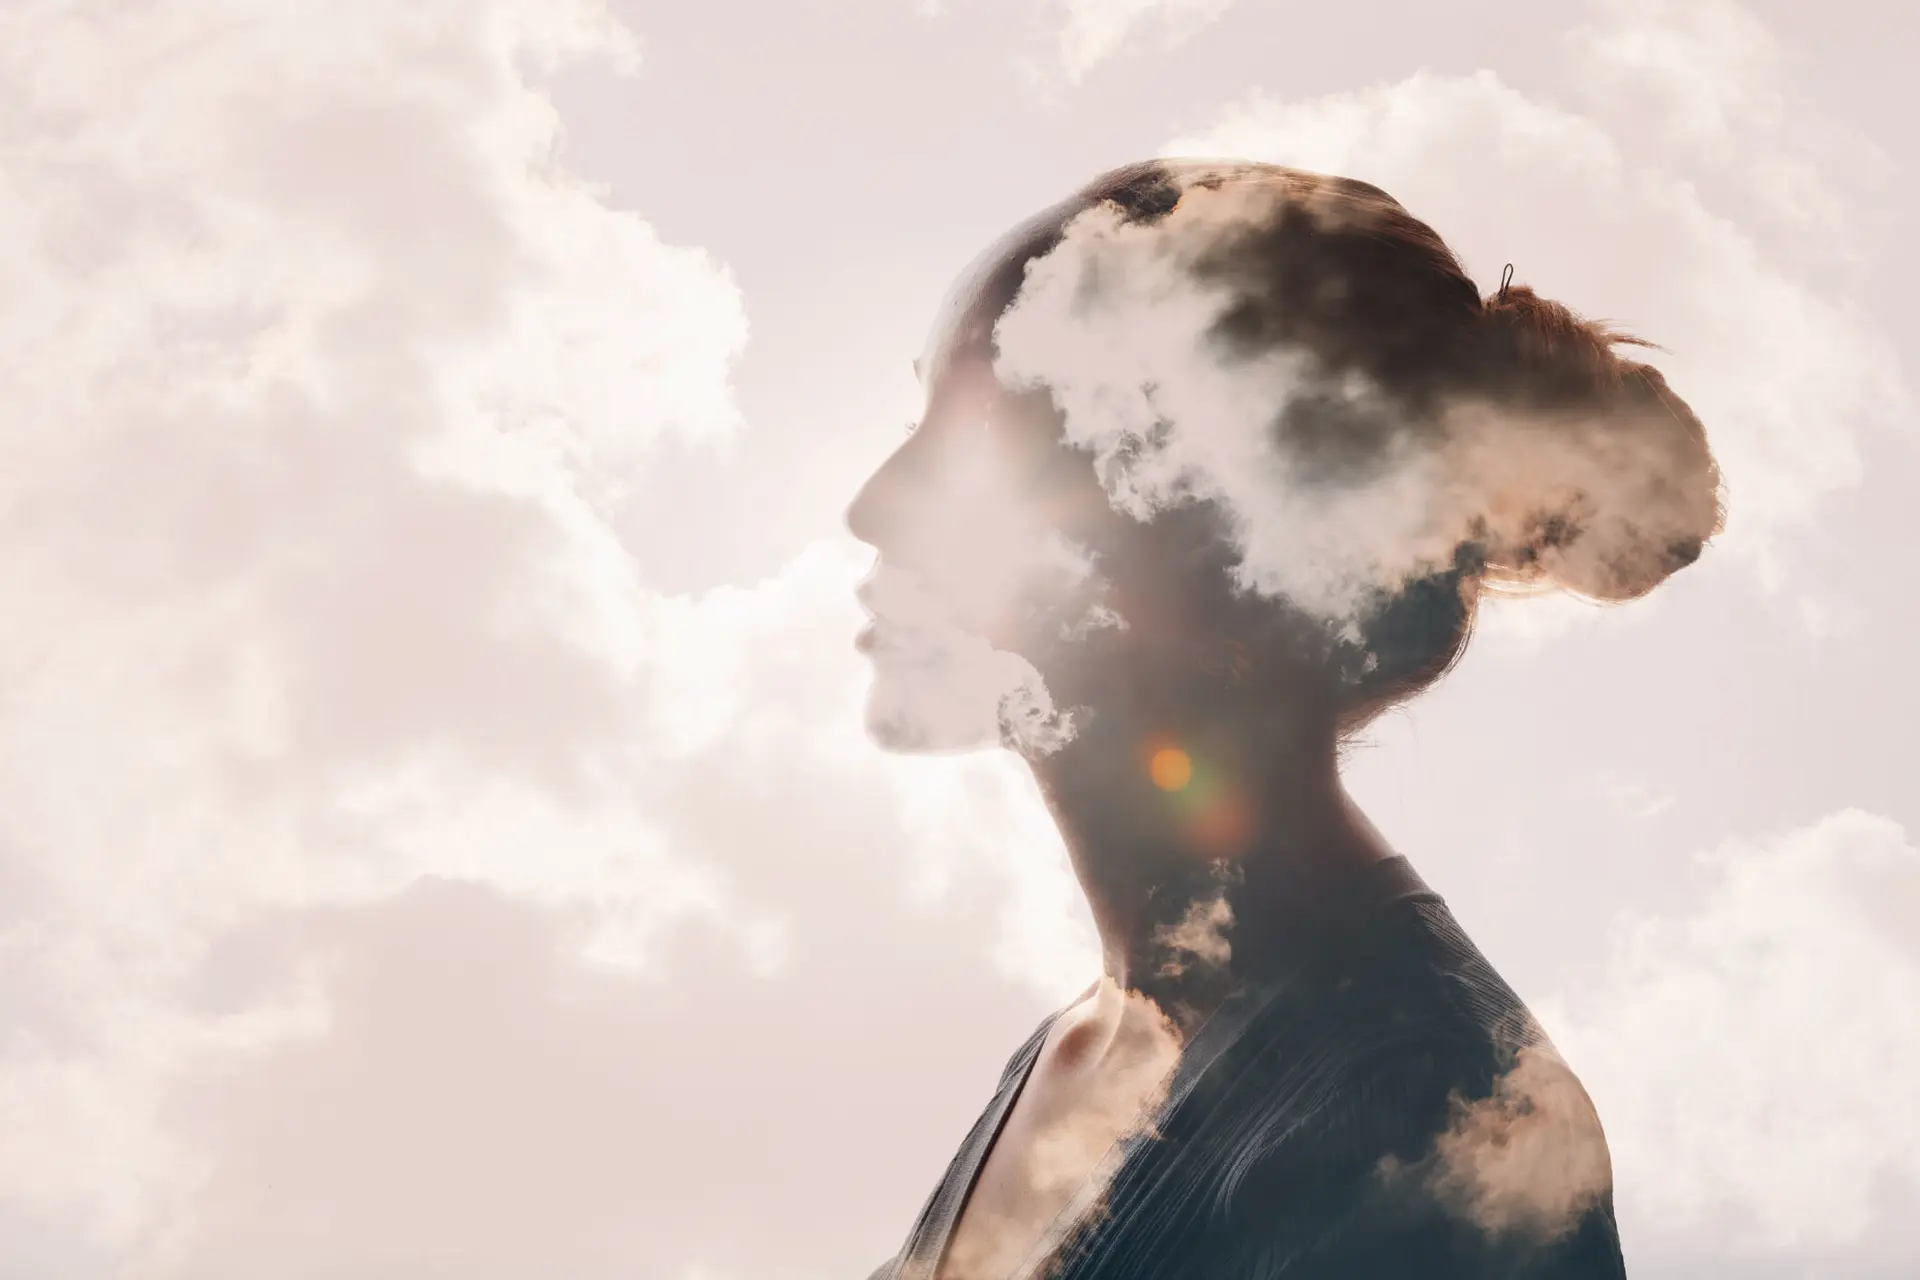 a woman is superimposed in the clouds to reflect mental health struggles